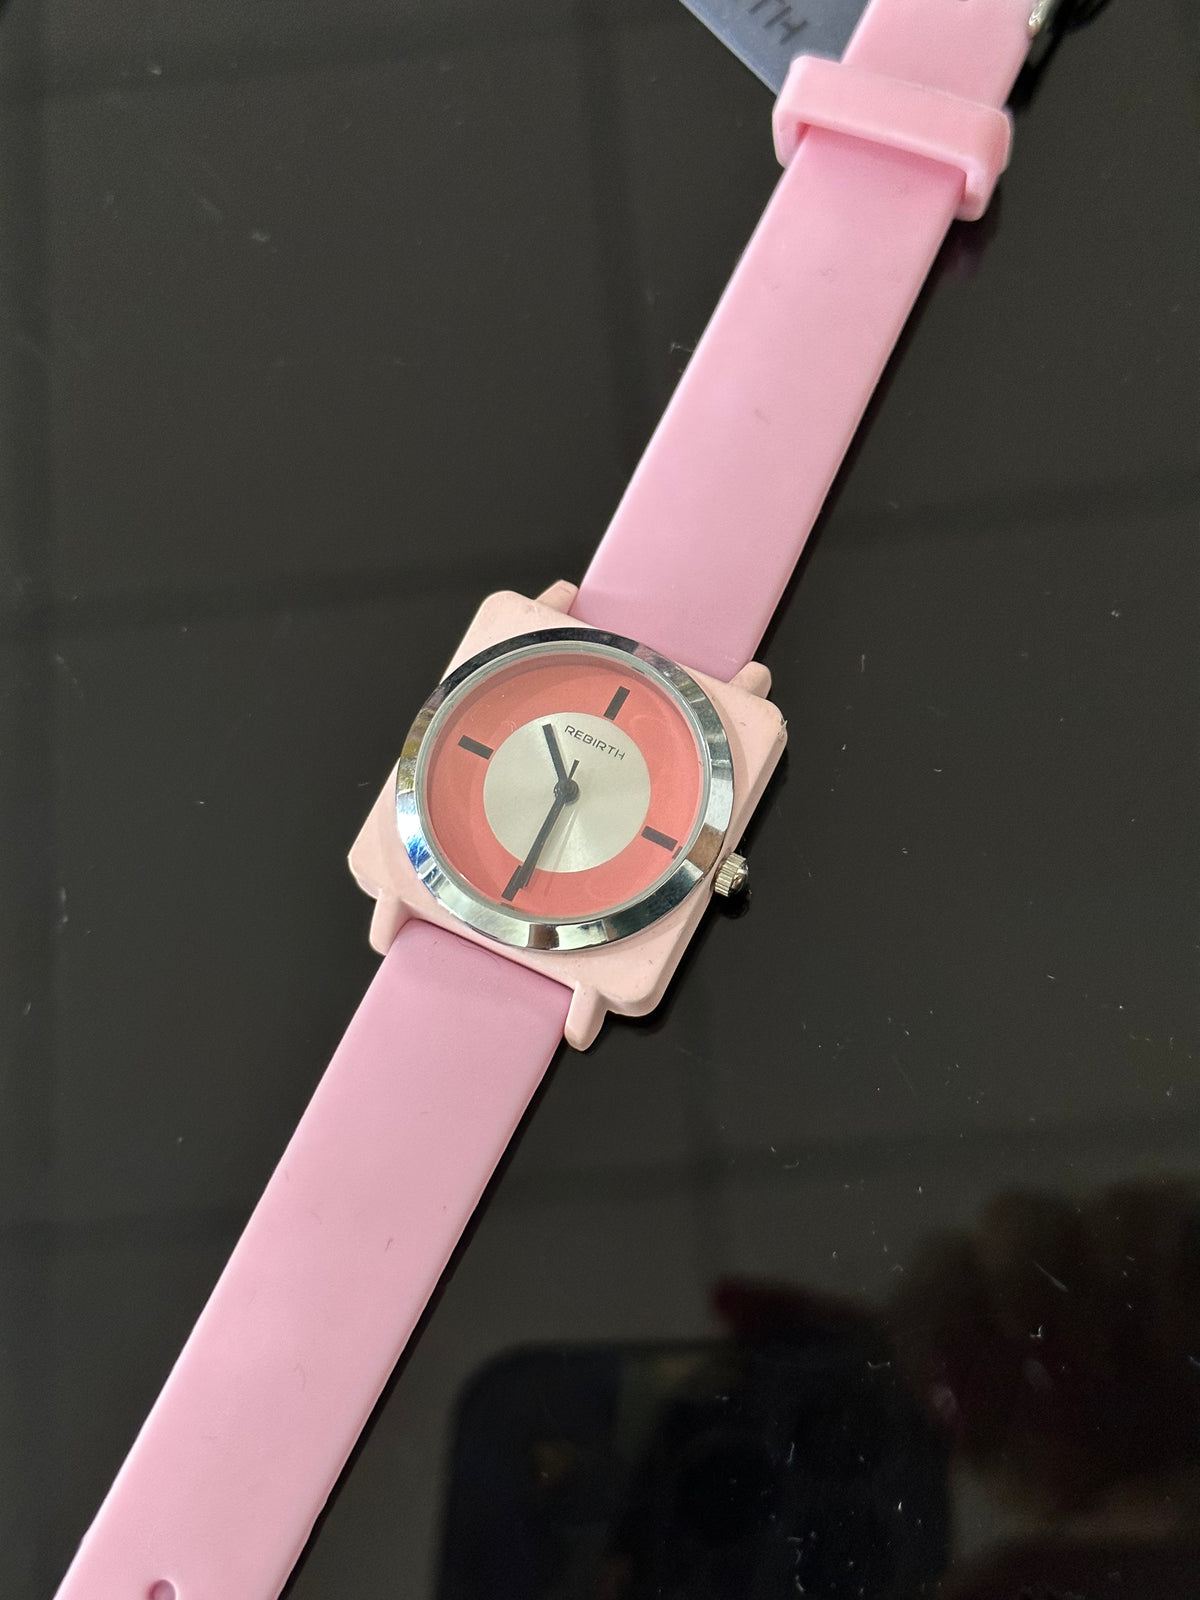 Watch Rebirth pink square face